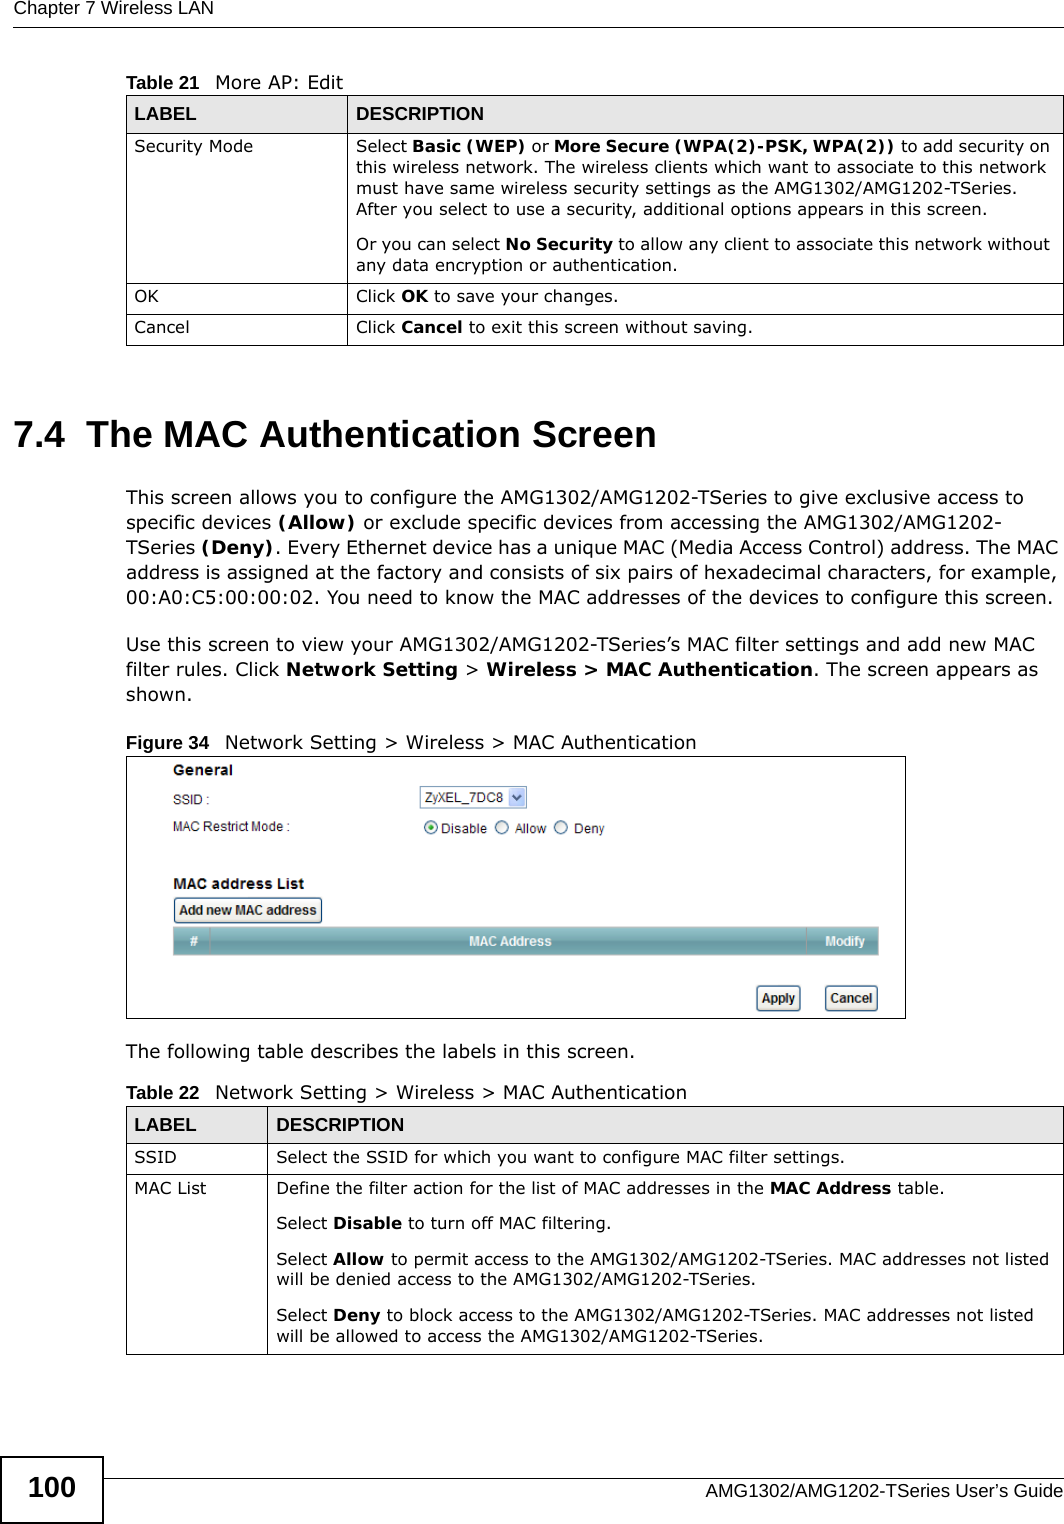 Chapter 7 Wireless LANAMG1302/AMG1202-TSeries User’s Guide1007.4  The MAC Authentication ScreenThis screen allows you to configure the AMG1302/AMG1202-TSeries to give exclusive access to specific devices (Allow) or exclude specific devices from accessing the AMG1302/AMG1202-TSeries (Deny). Every Ethernet device has a unique MAC (Media Access Control) address. The MAC address is assigned at the factory and consists of six pairs of hexadecimal characters, for example, 00:A0:C5:00:00:02. You need to know the MAC addresses of the devices to configure this screen.Use this screen to view your AMG1302/AMG1202-TSeries’s MAC filter settings and add new MAC filter rules. Click Network Setting &gt; Wireless &gt; MAC Authentication. The screen appears as shown.Figure 34   Network Setting &gt; Wireless &gt; MAC AuthenticationThe following table describes the labels in this screen.Security Mode Select Basic (WEP) or More Secure (WPA(2)-PSK, WPA(2)) to add security on this wireless network. The wireless clients which want to associate to this network must have same wireless security settings as the AMG1302/AMG1202-TSeries. After you select to use a security, additional options appears in this screen. Or you can select No Security to allow any client to associate this network without any data encryption or authentication.OK Click OK to save your changes.Cancel Click Cancel to exit this screen without saving.Table 21   More AP: EditLABEL DESCRIPTIONTable 22   Network Setting &gt; Wireless &gt; MAC AuthenticationLABEL DESCRIPTIONSSID Select the SSID for which you want to configure MAC filter settings.MAC List Define the filter action for the list of MAC addresses in the MAC Address table. Select Disable to turn off MAC filtering.Select Allow to permit access to the AMG1302/AMG1202-TSeries. MAC addresses not listed will be denied access to the AMG1302/AMG1202-TSeries. Select Deny to block access to the AMG1302/AMG1202-TSeries. MAC addresses not listed will be allowed to access the AMG1302/AMG1202-TSeries. 